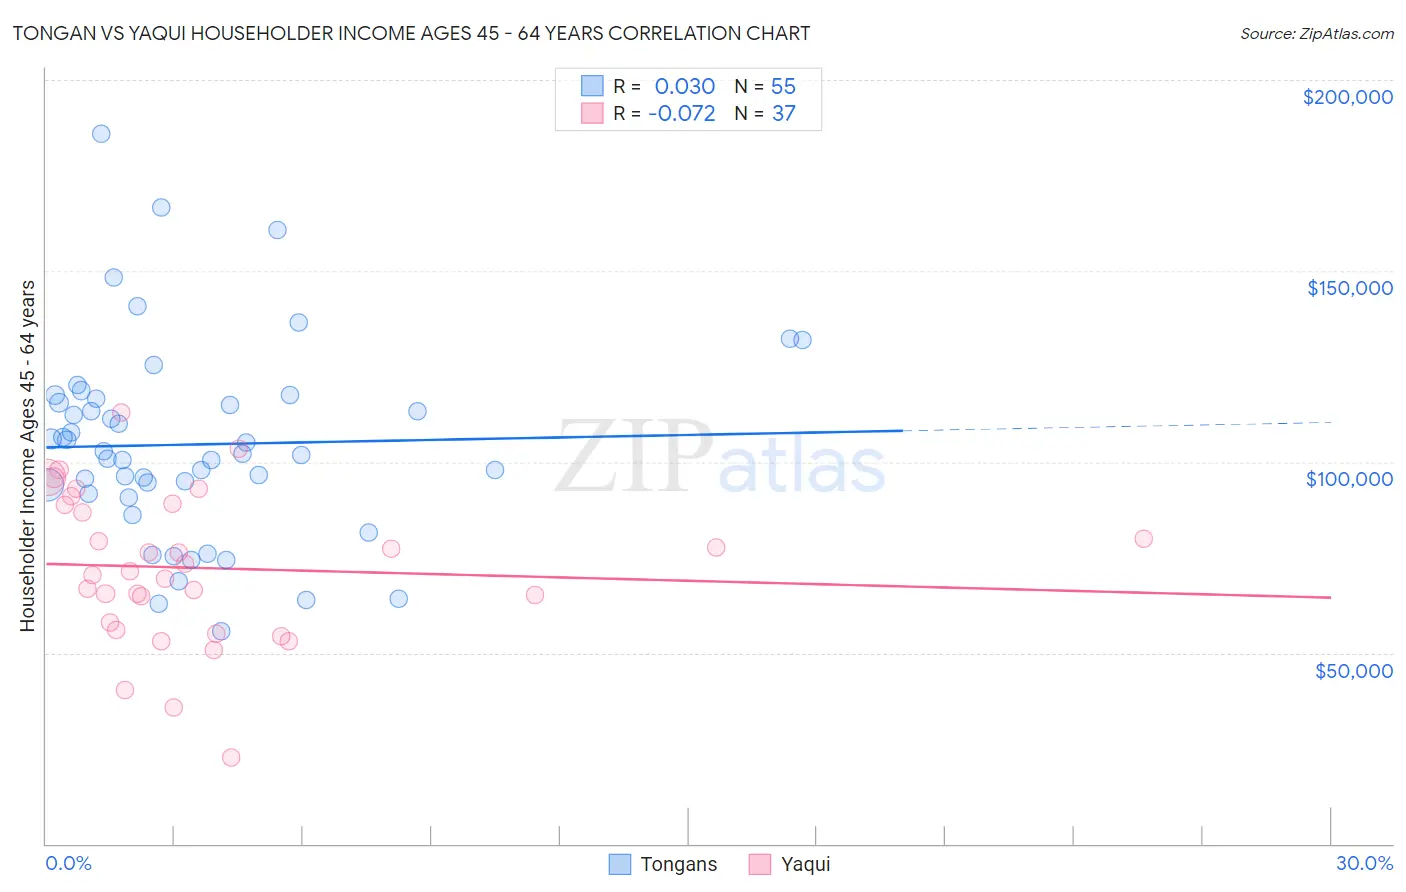 Tongan vs Yaqui Householder Income Ages 45 - 64 years